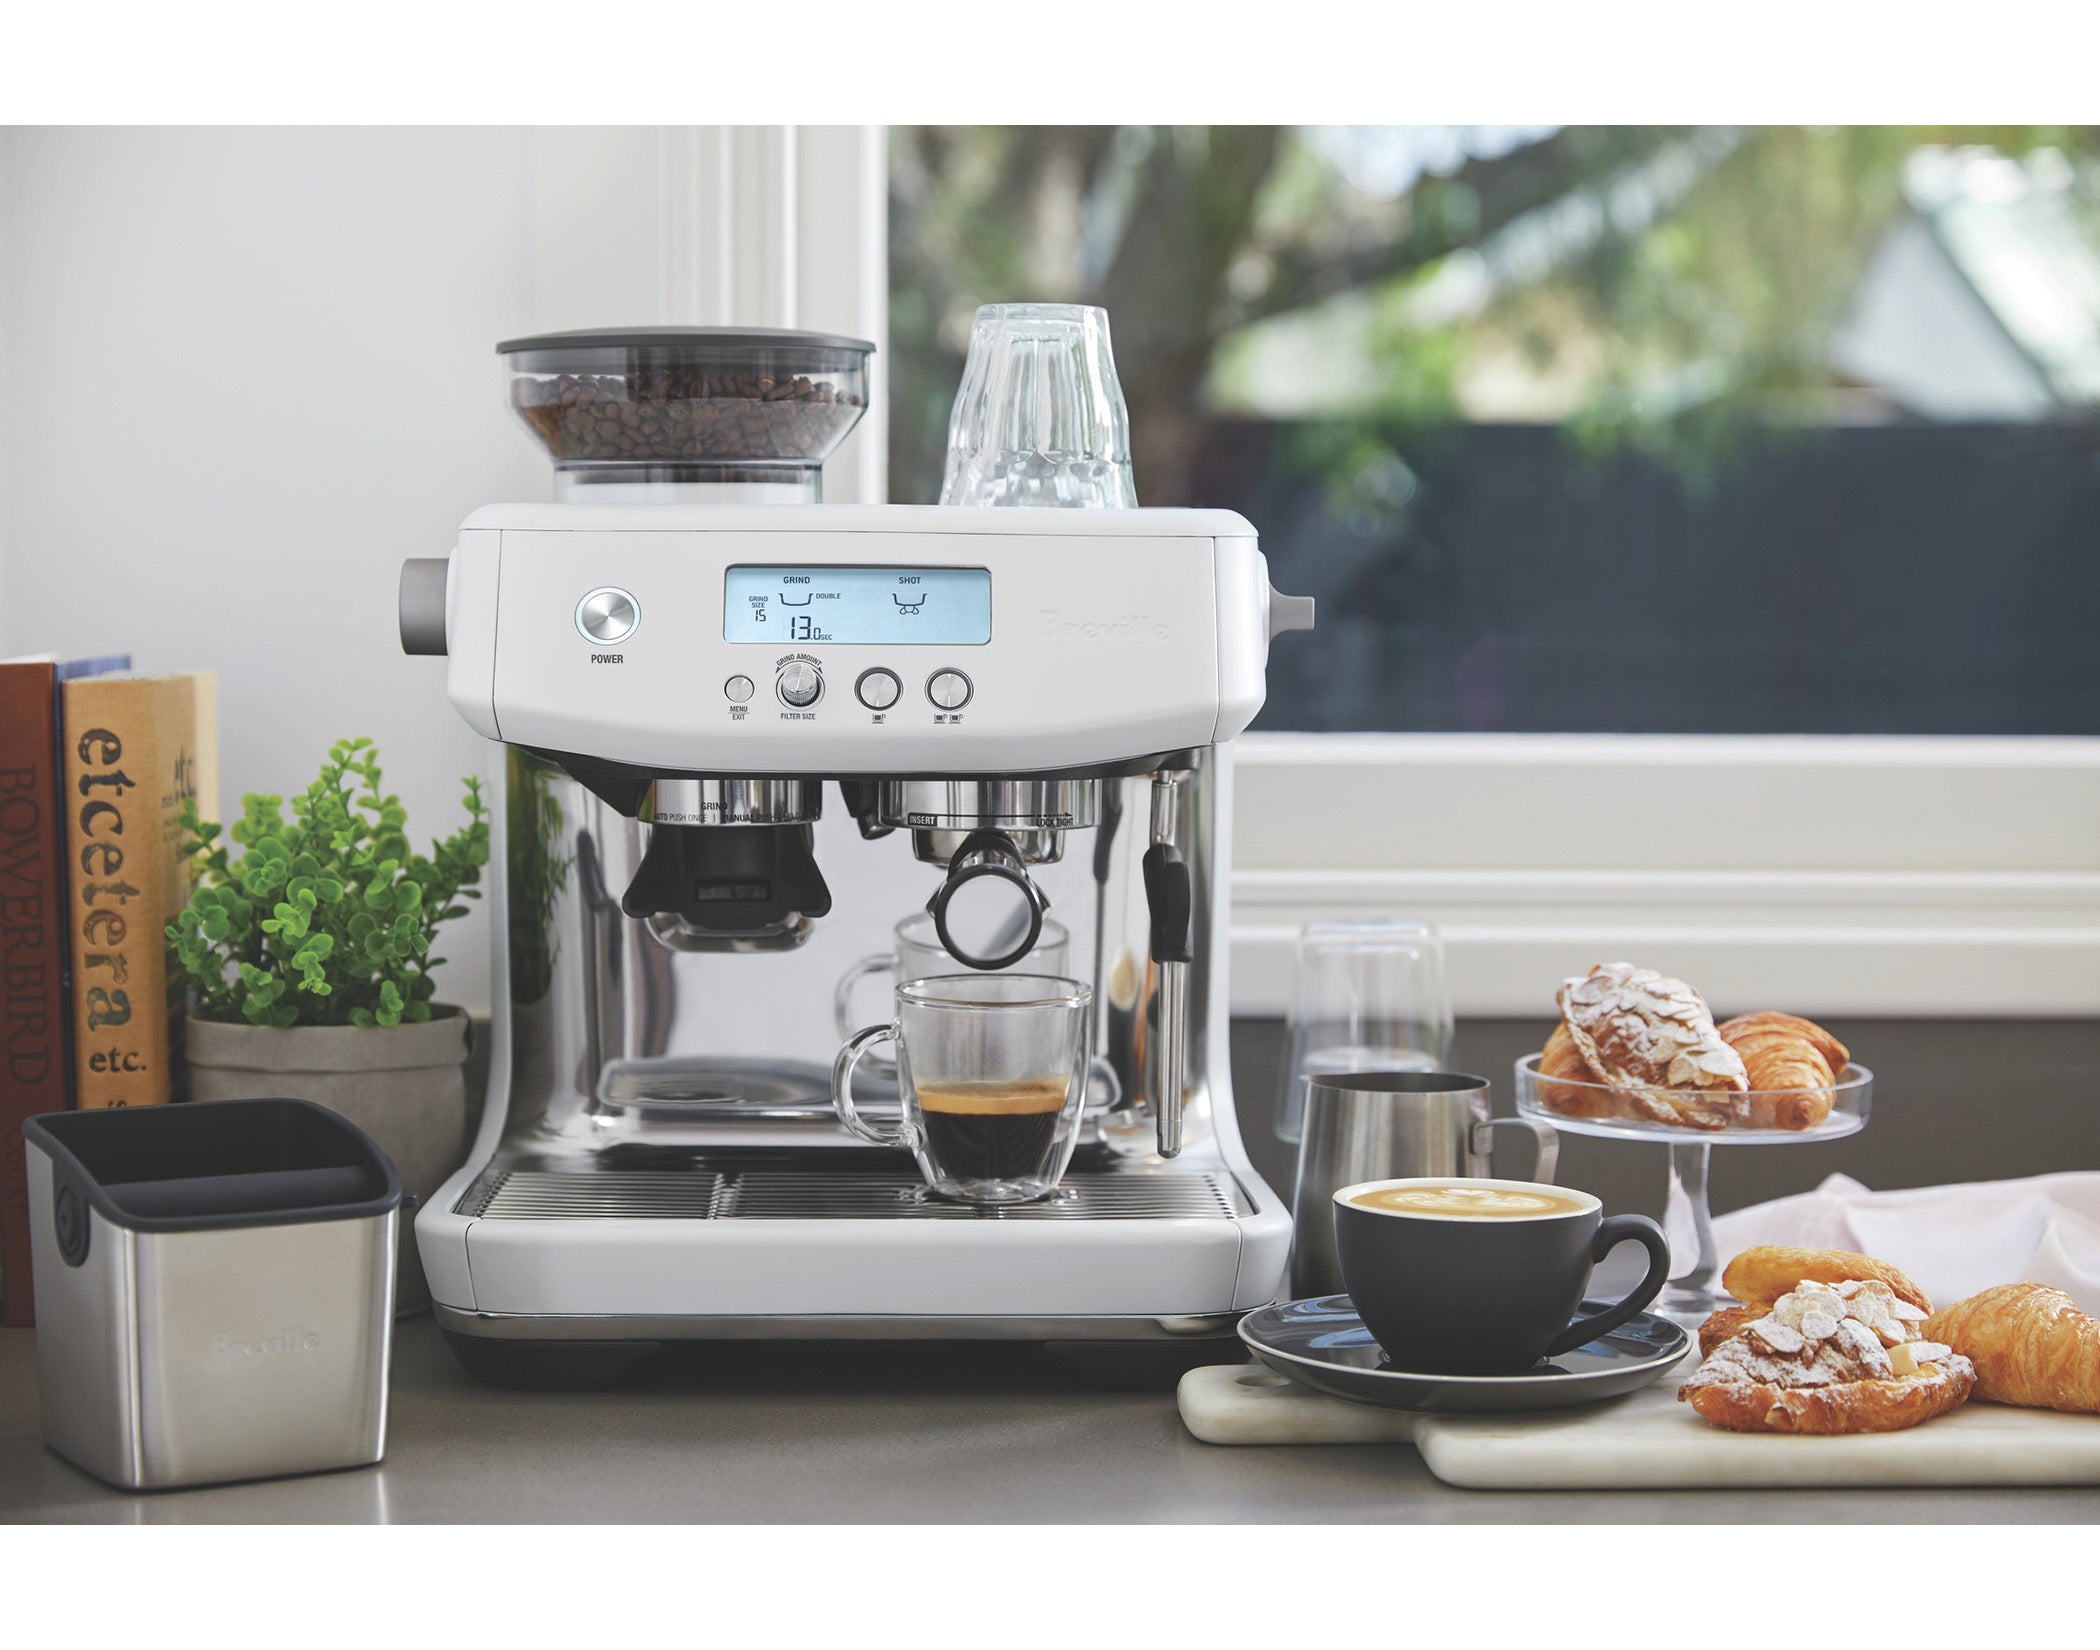 Breville's Journey to Becoming a Coffee Machine Leader